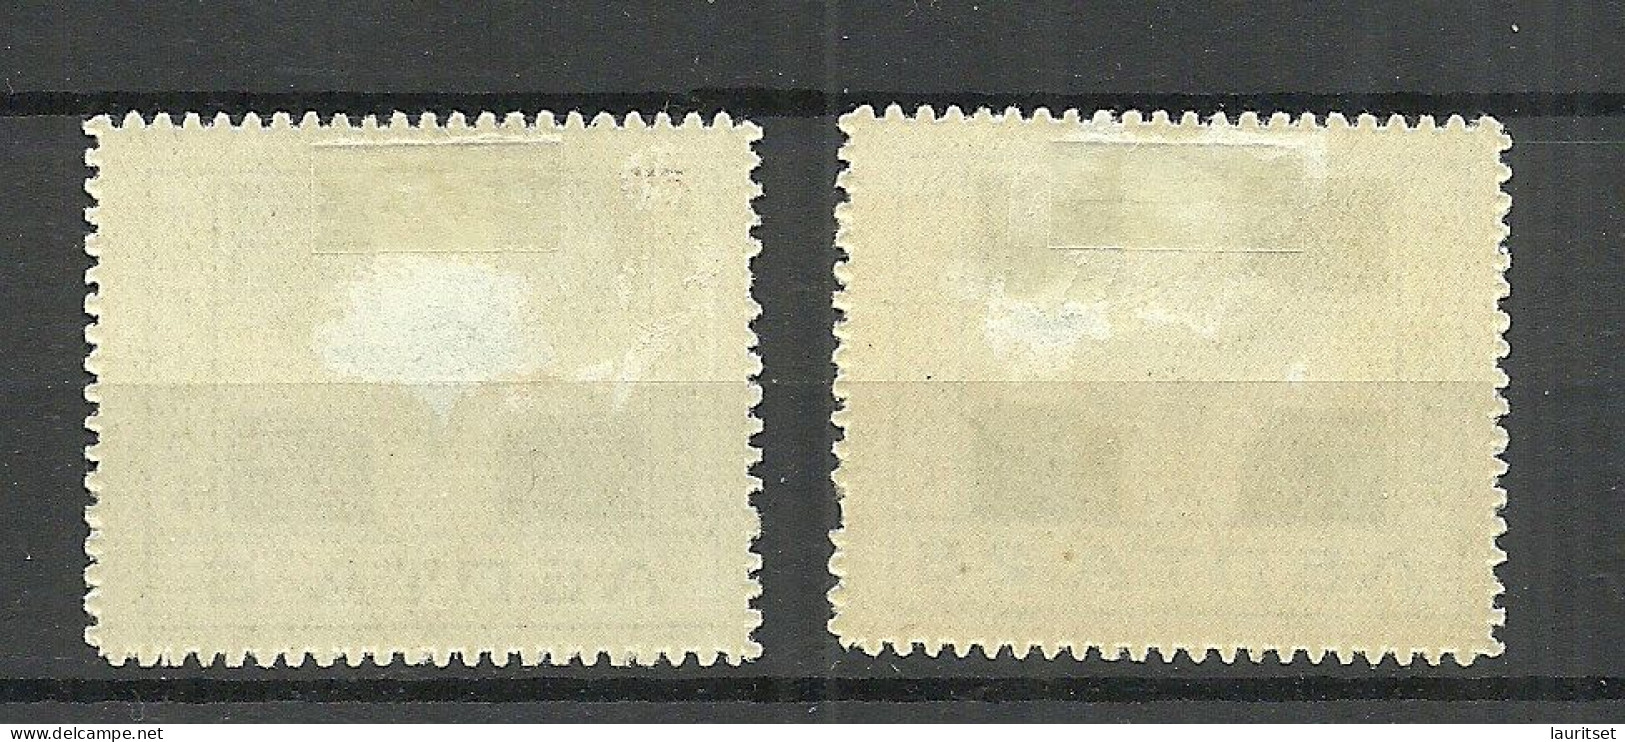 EPIRUS Epeiros Greece 1914 Michel 10 & 12 * NB! Lightly Thinned In The Middle! - Nordepirus